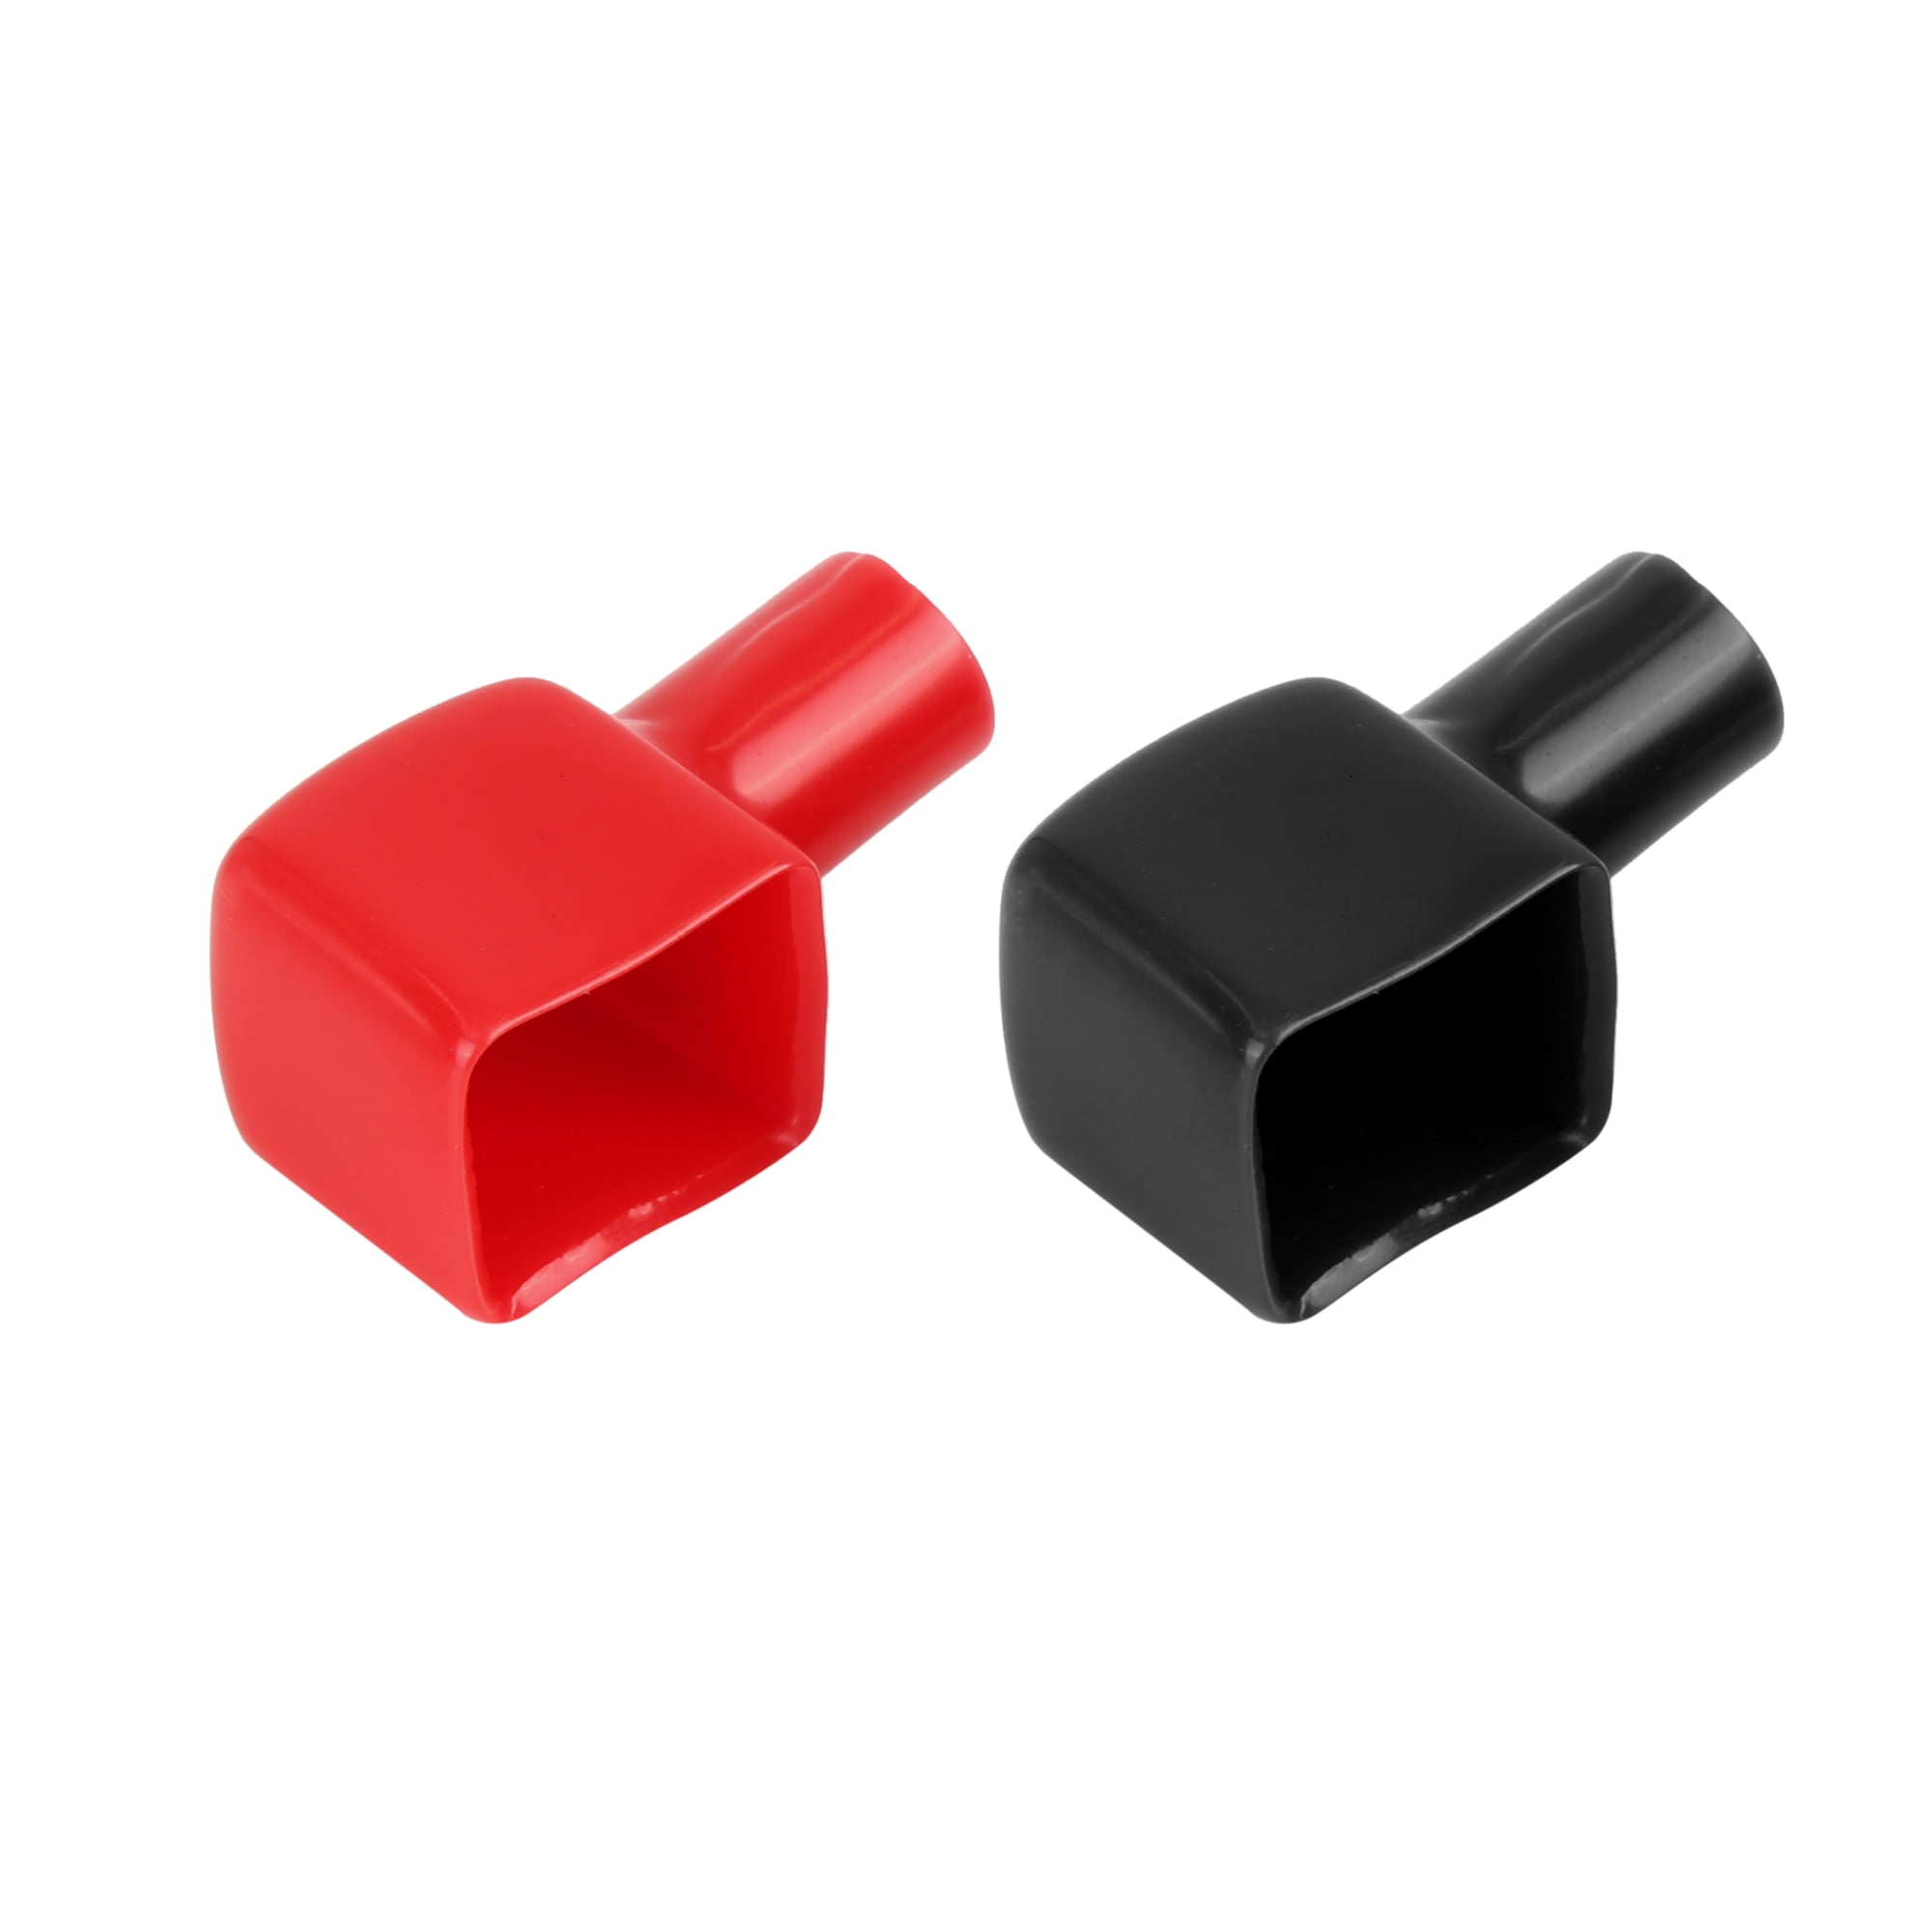 Akozon Car Battery Terminal Covers 2pcs Positive and Negative Black & Red 